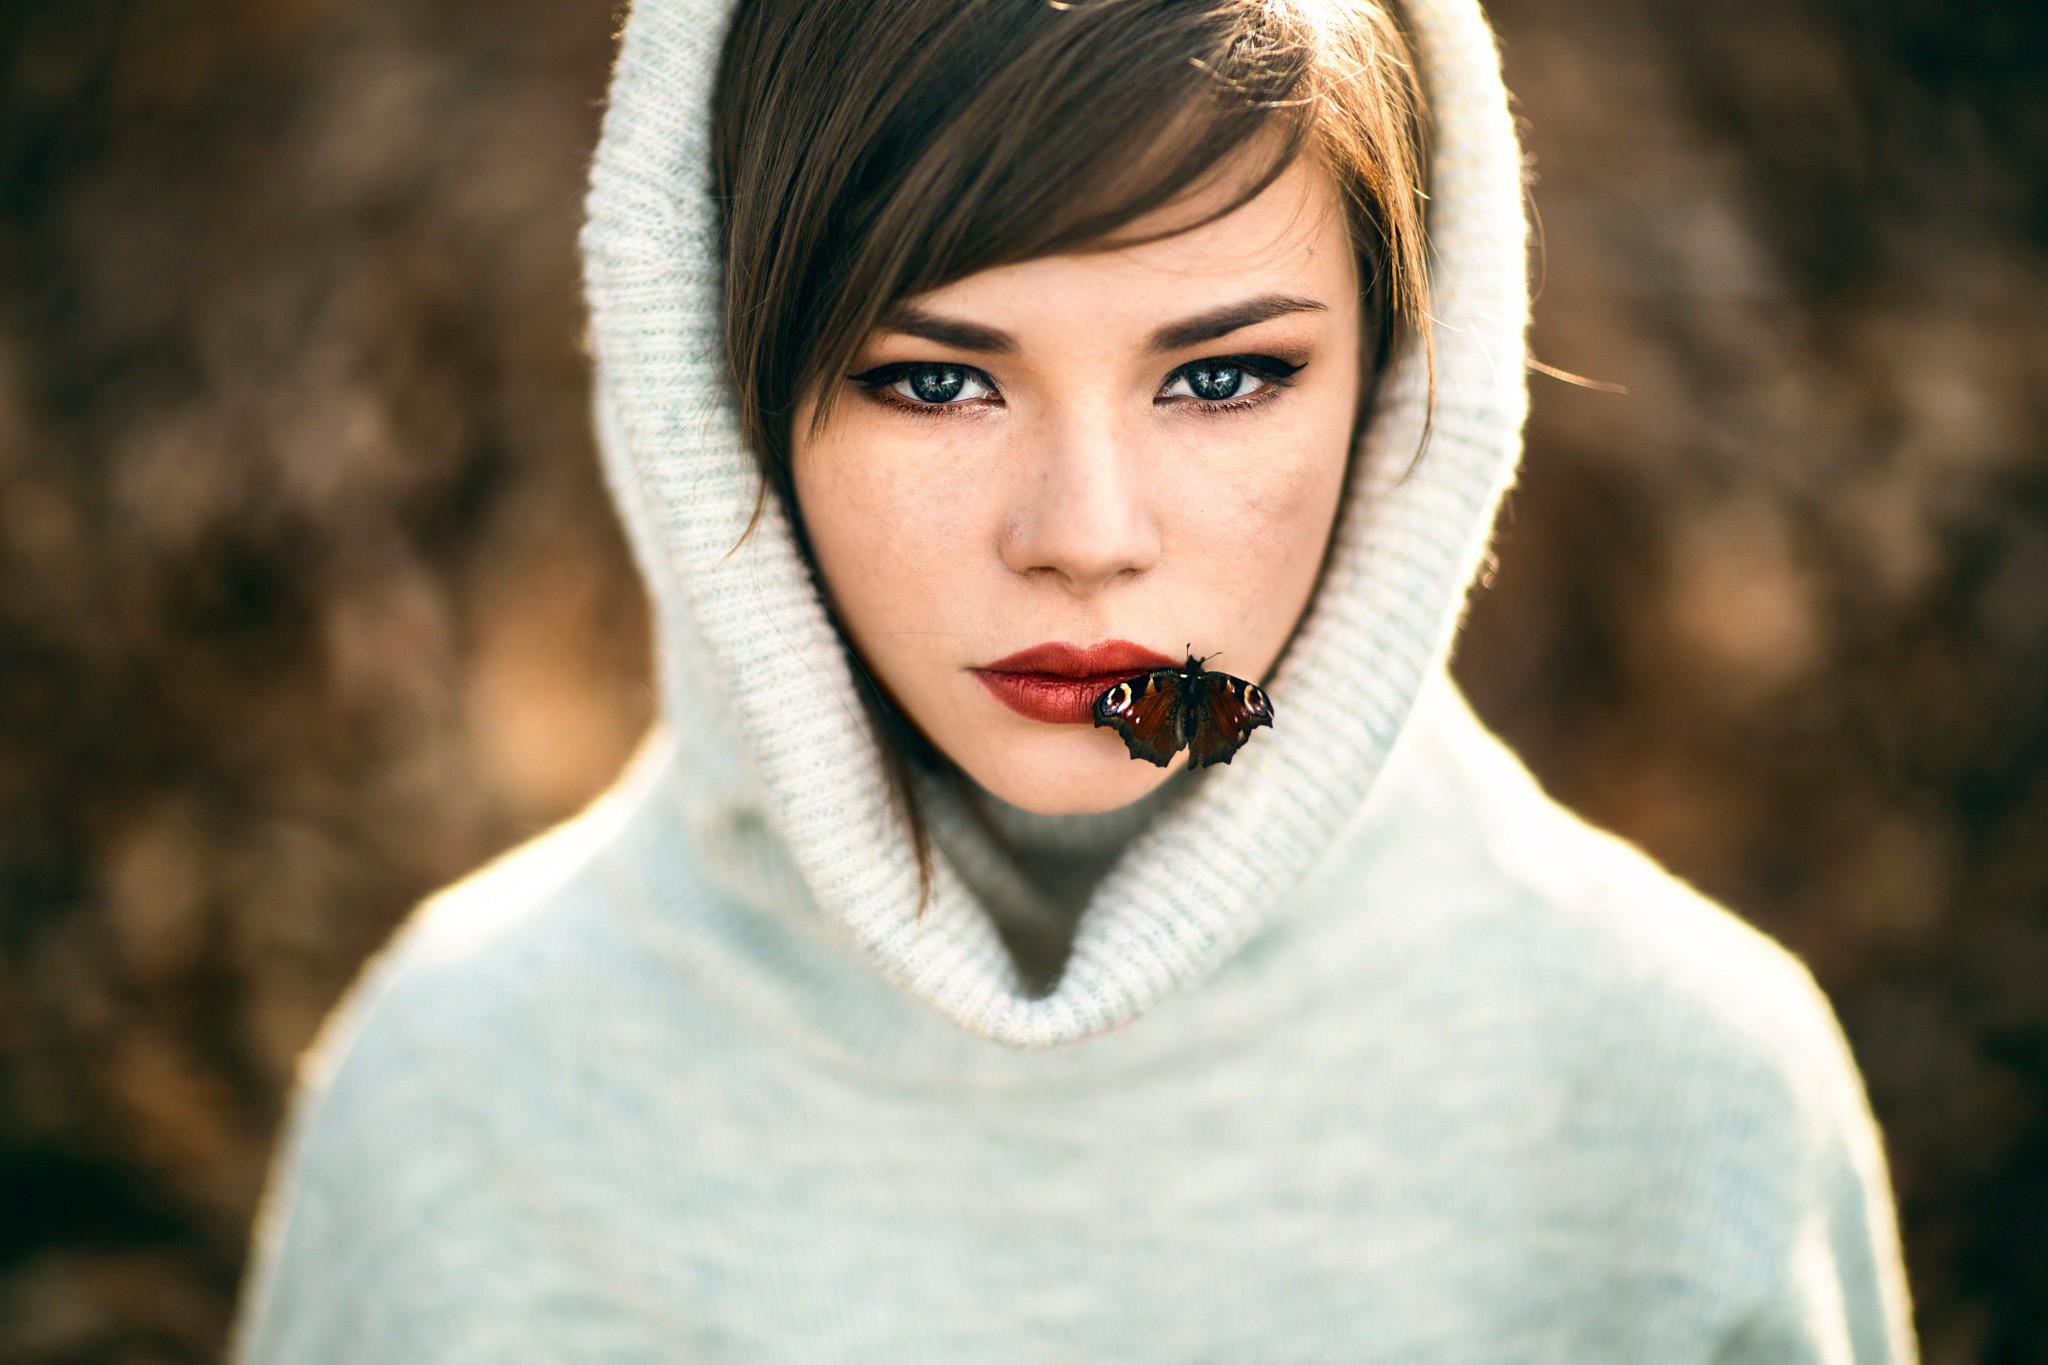 People 2048x1365 women face lepidoptera insect hoods animals red lipstick brunette women outdoors portrait white sweater looking at viewer